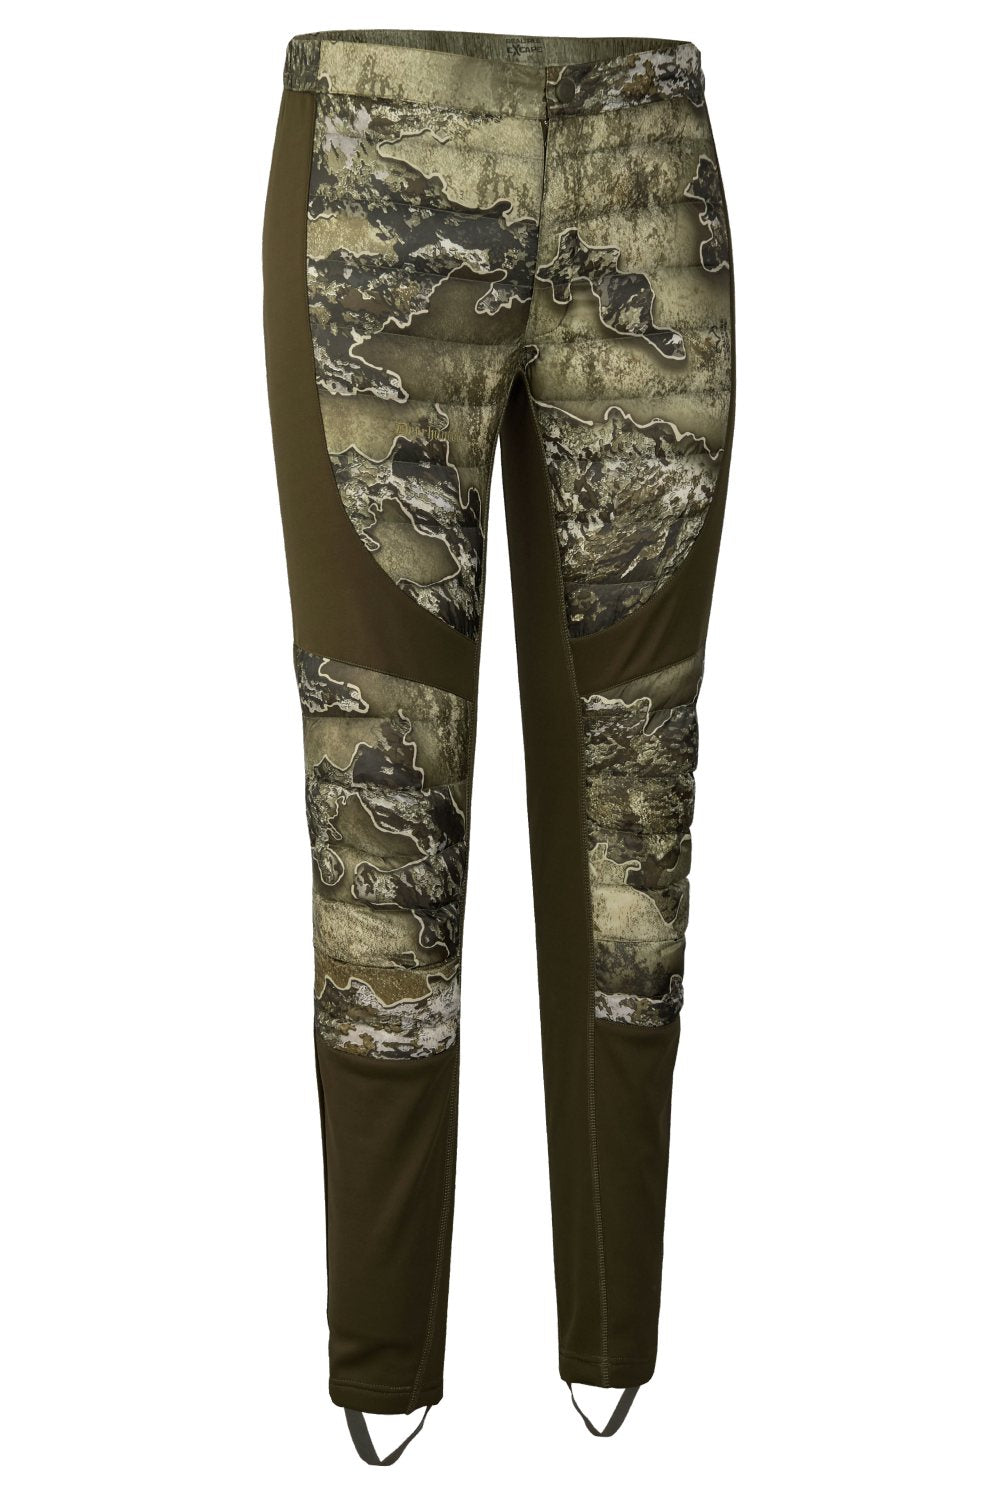 Deerhunter Excape Quilted Trousers in Realtree Excape 